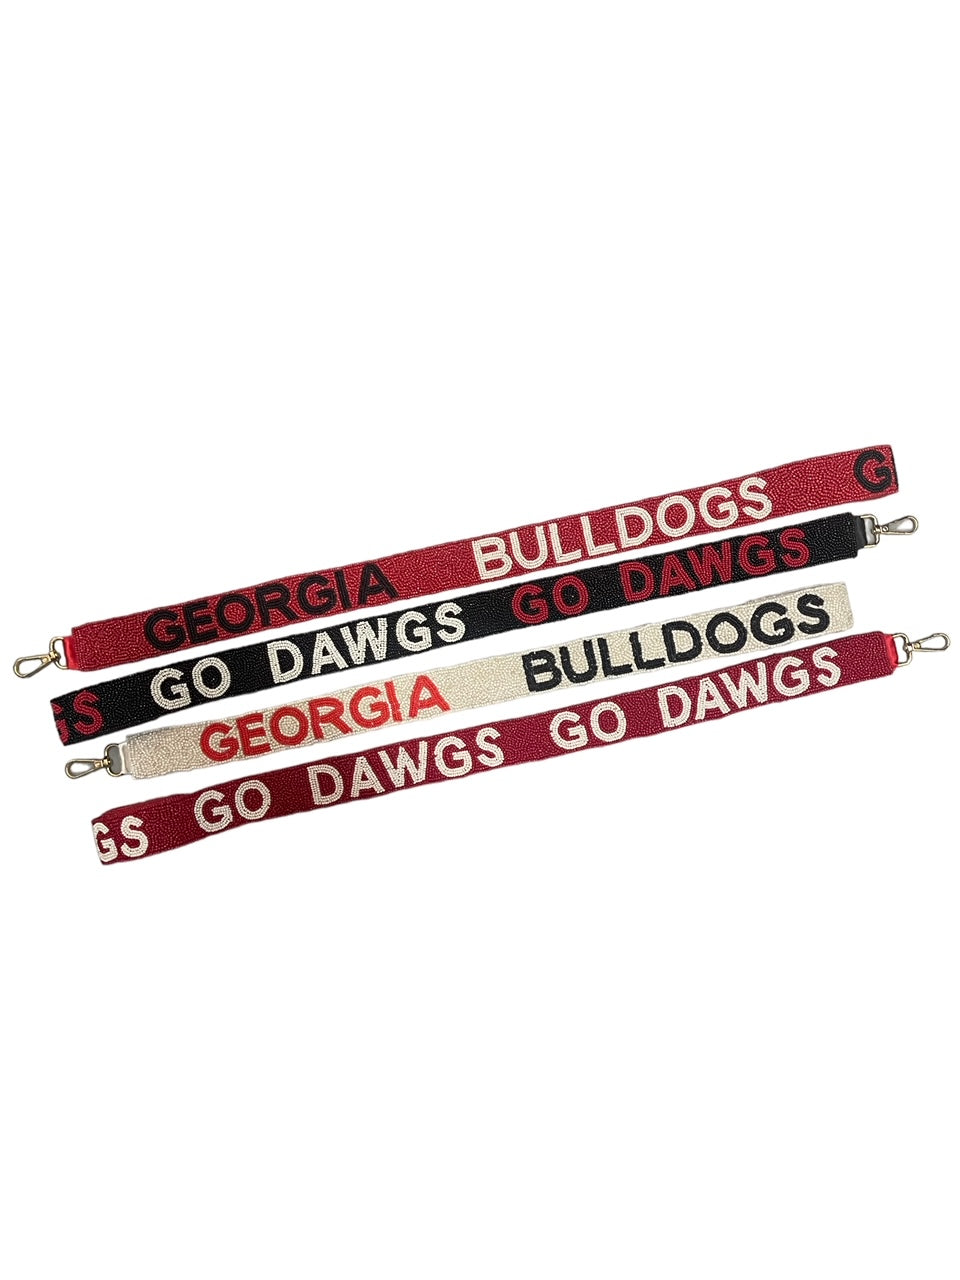 Game Day, Beaded Bag Strap, Clear Bag Strap, Football Strap